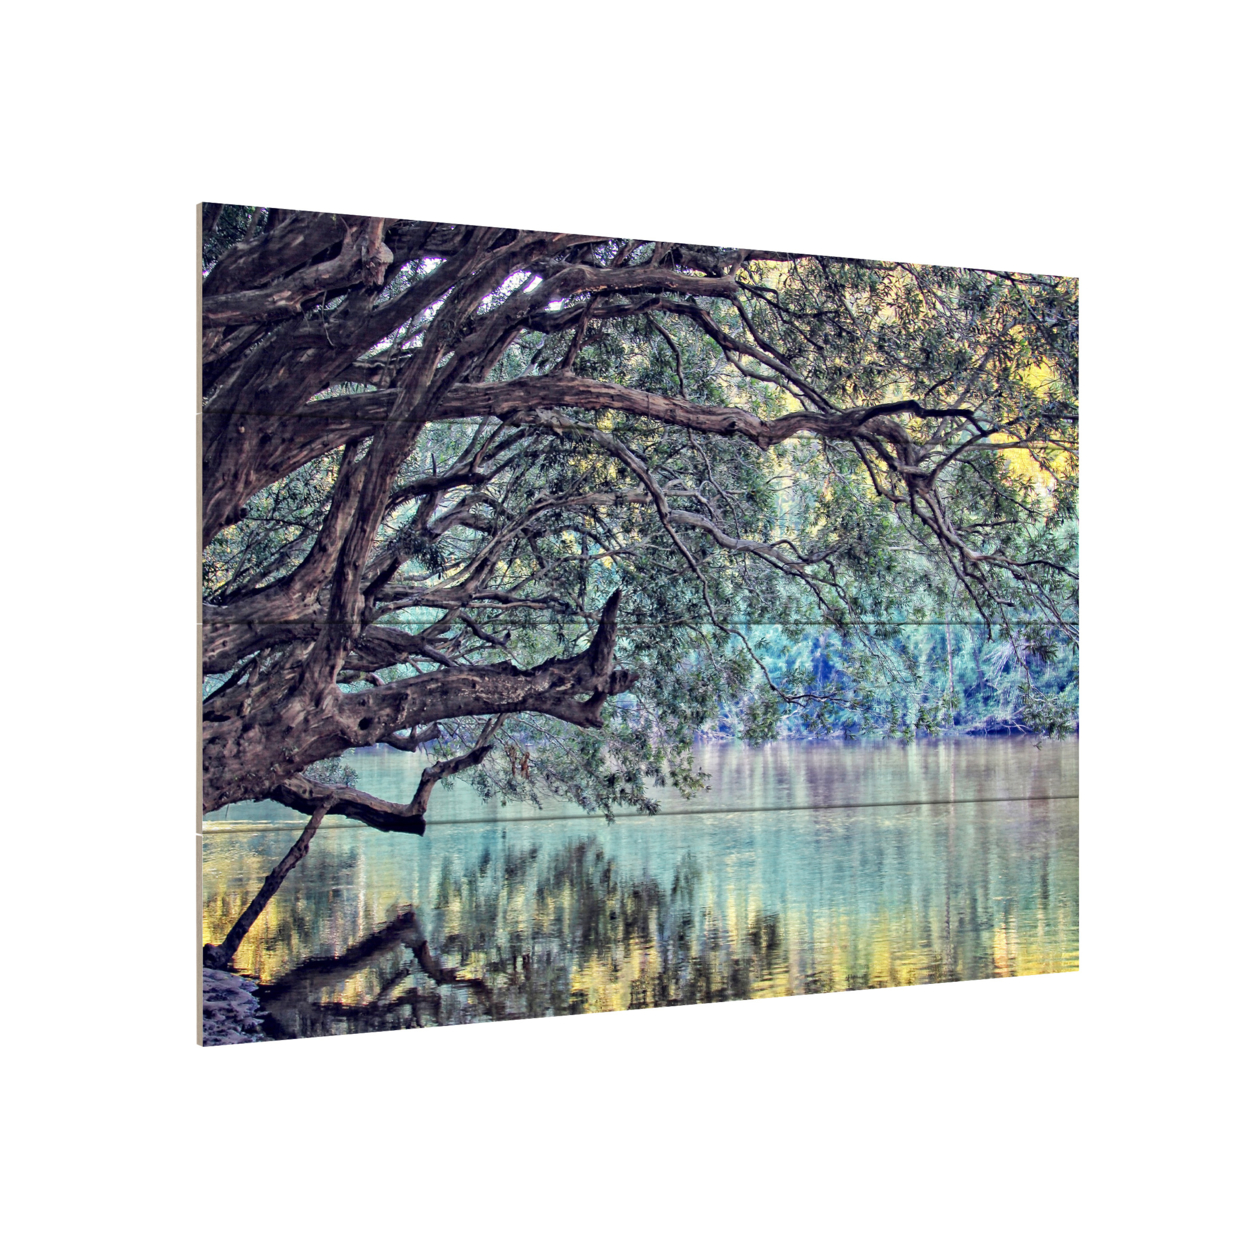 Wall Art 12 X 16 Inches Titled A Place To Dream Ready To Hang Printed On Wooden Planks